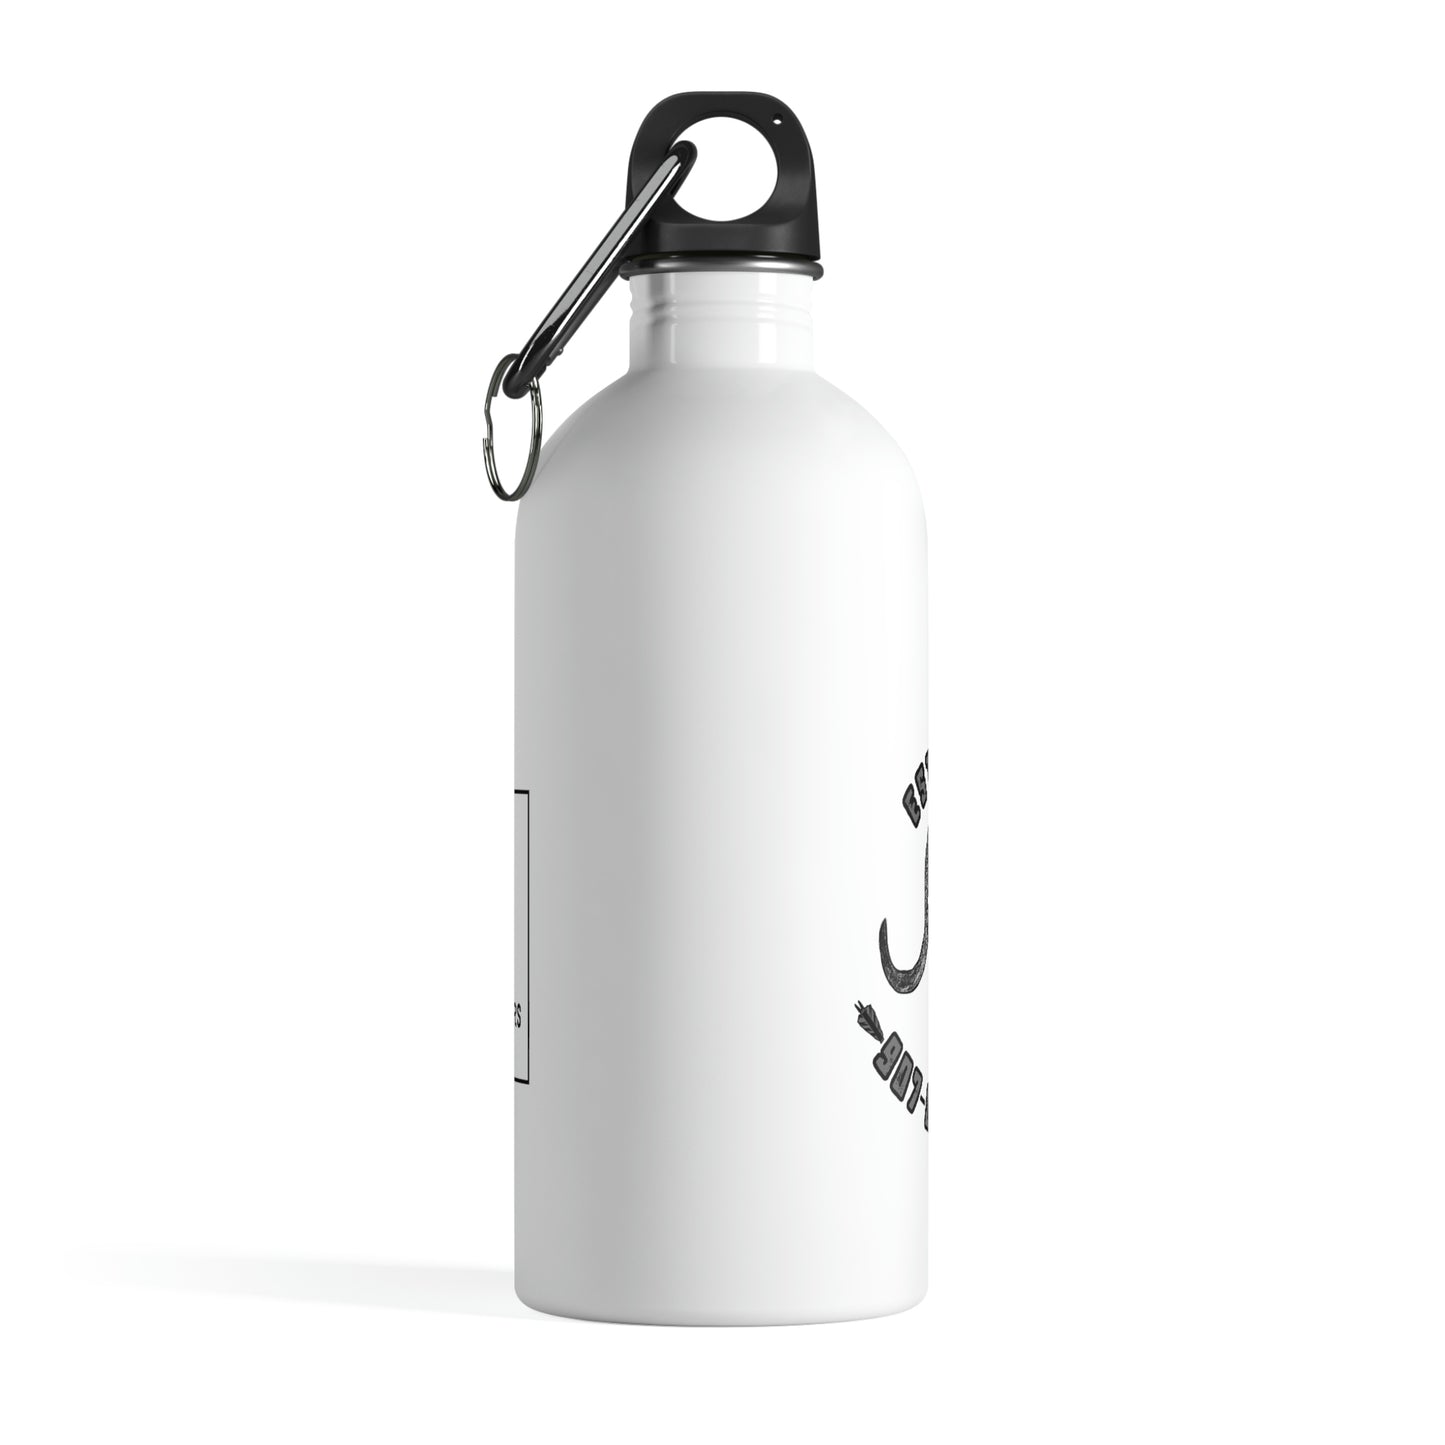 Musk ox Stainless Steel Water Bottle - 907Outdoors